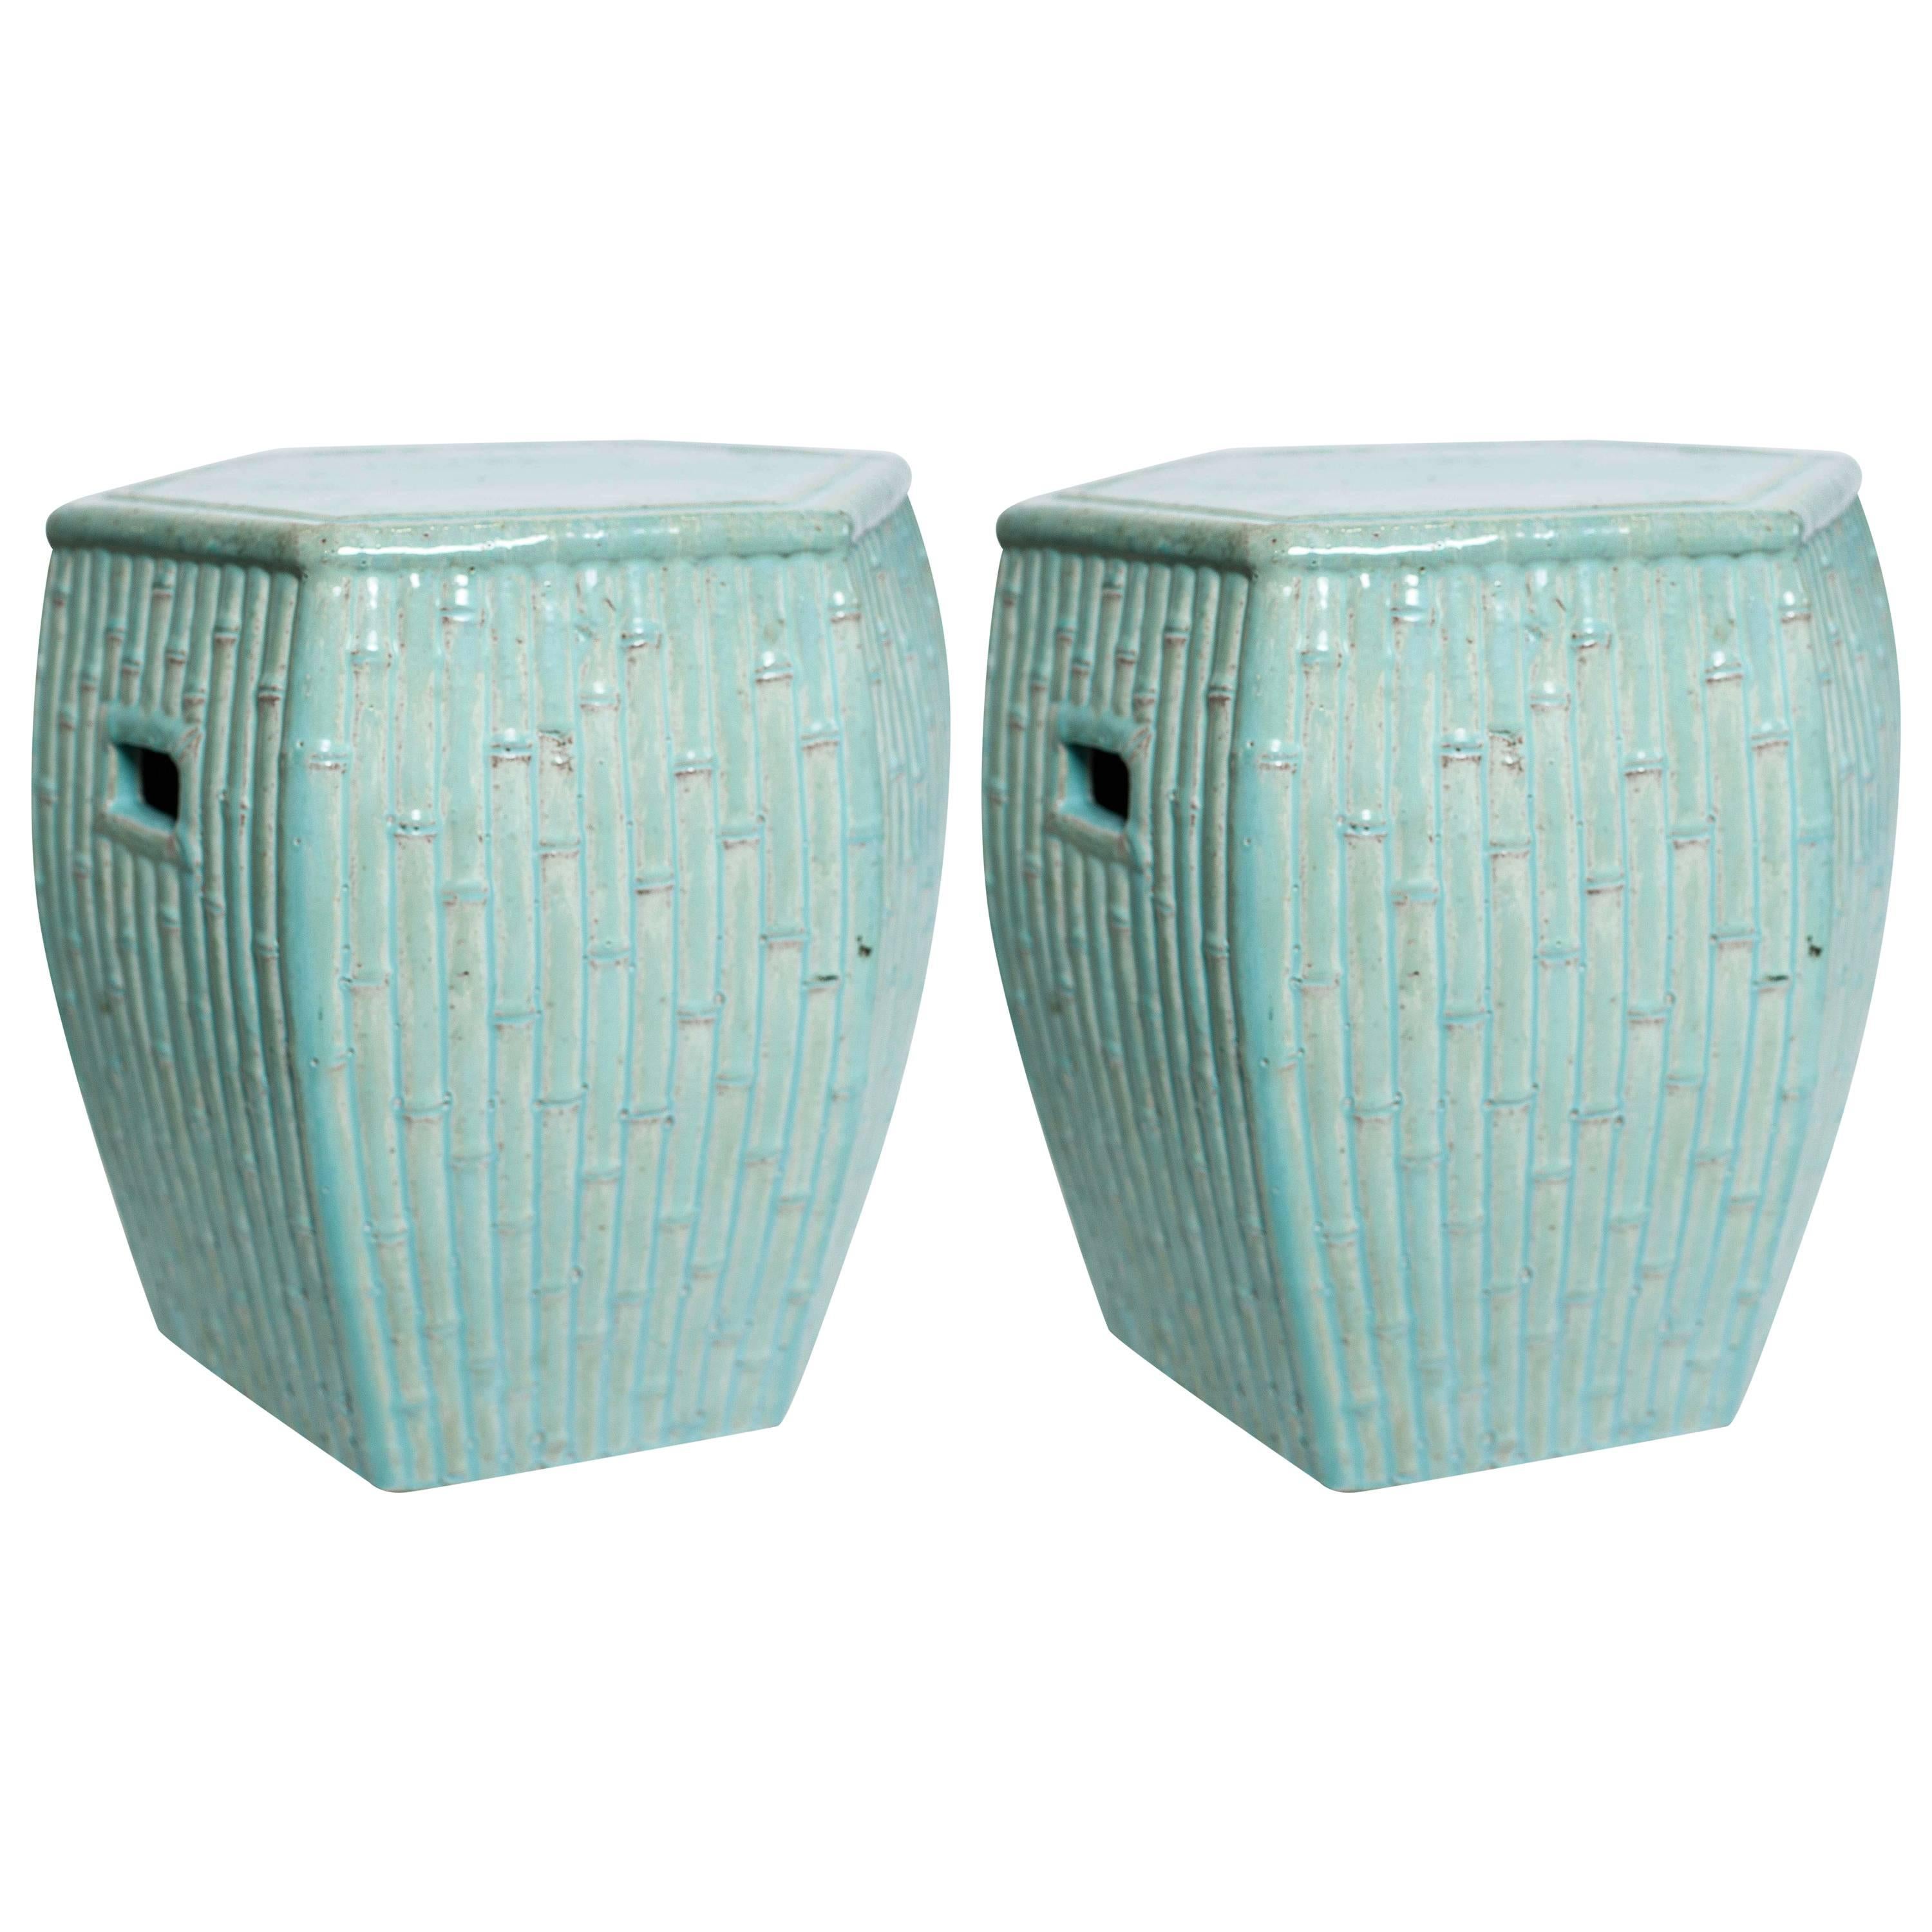 Mid-20th Century Chinese Pair of Garden Stools